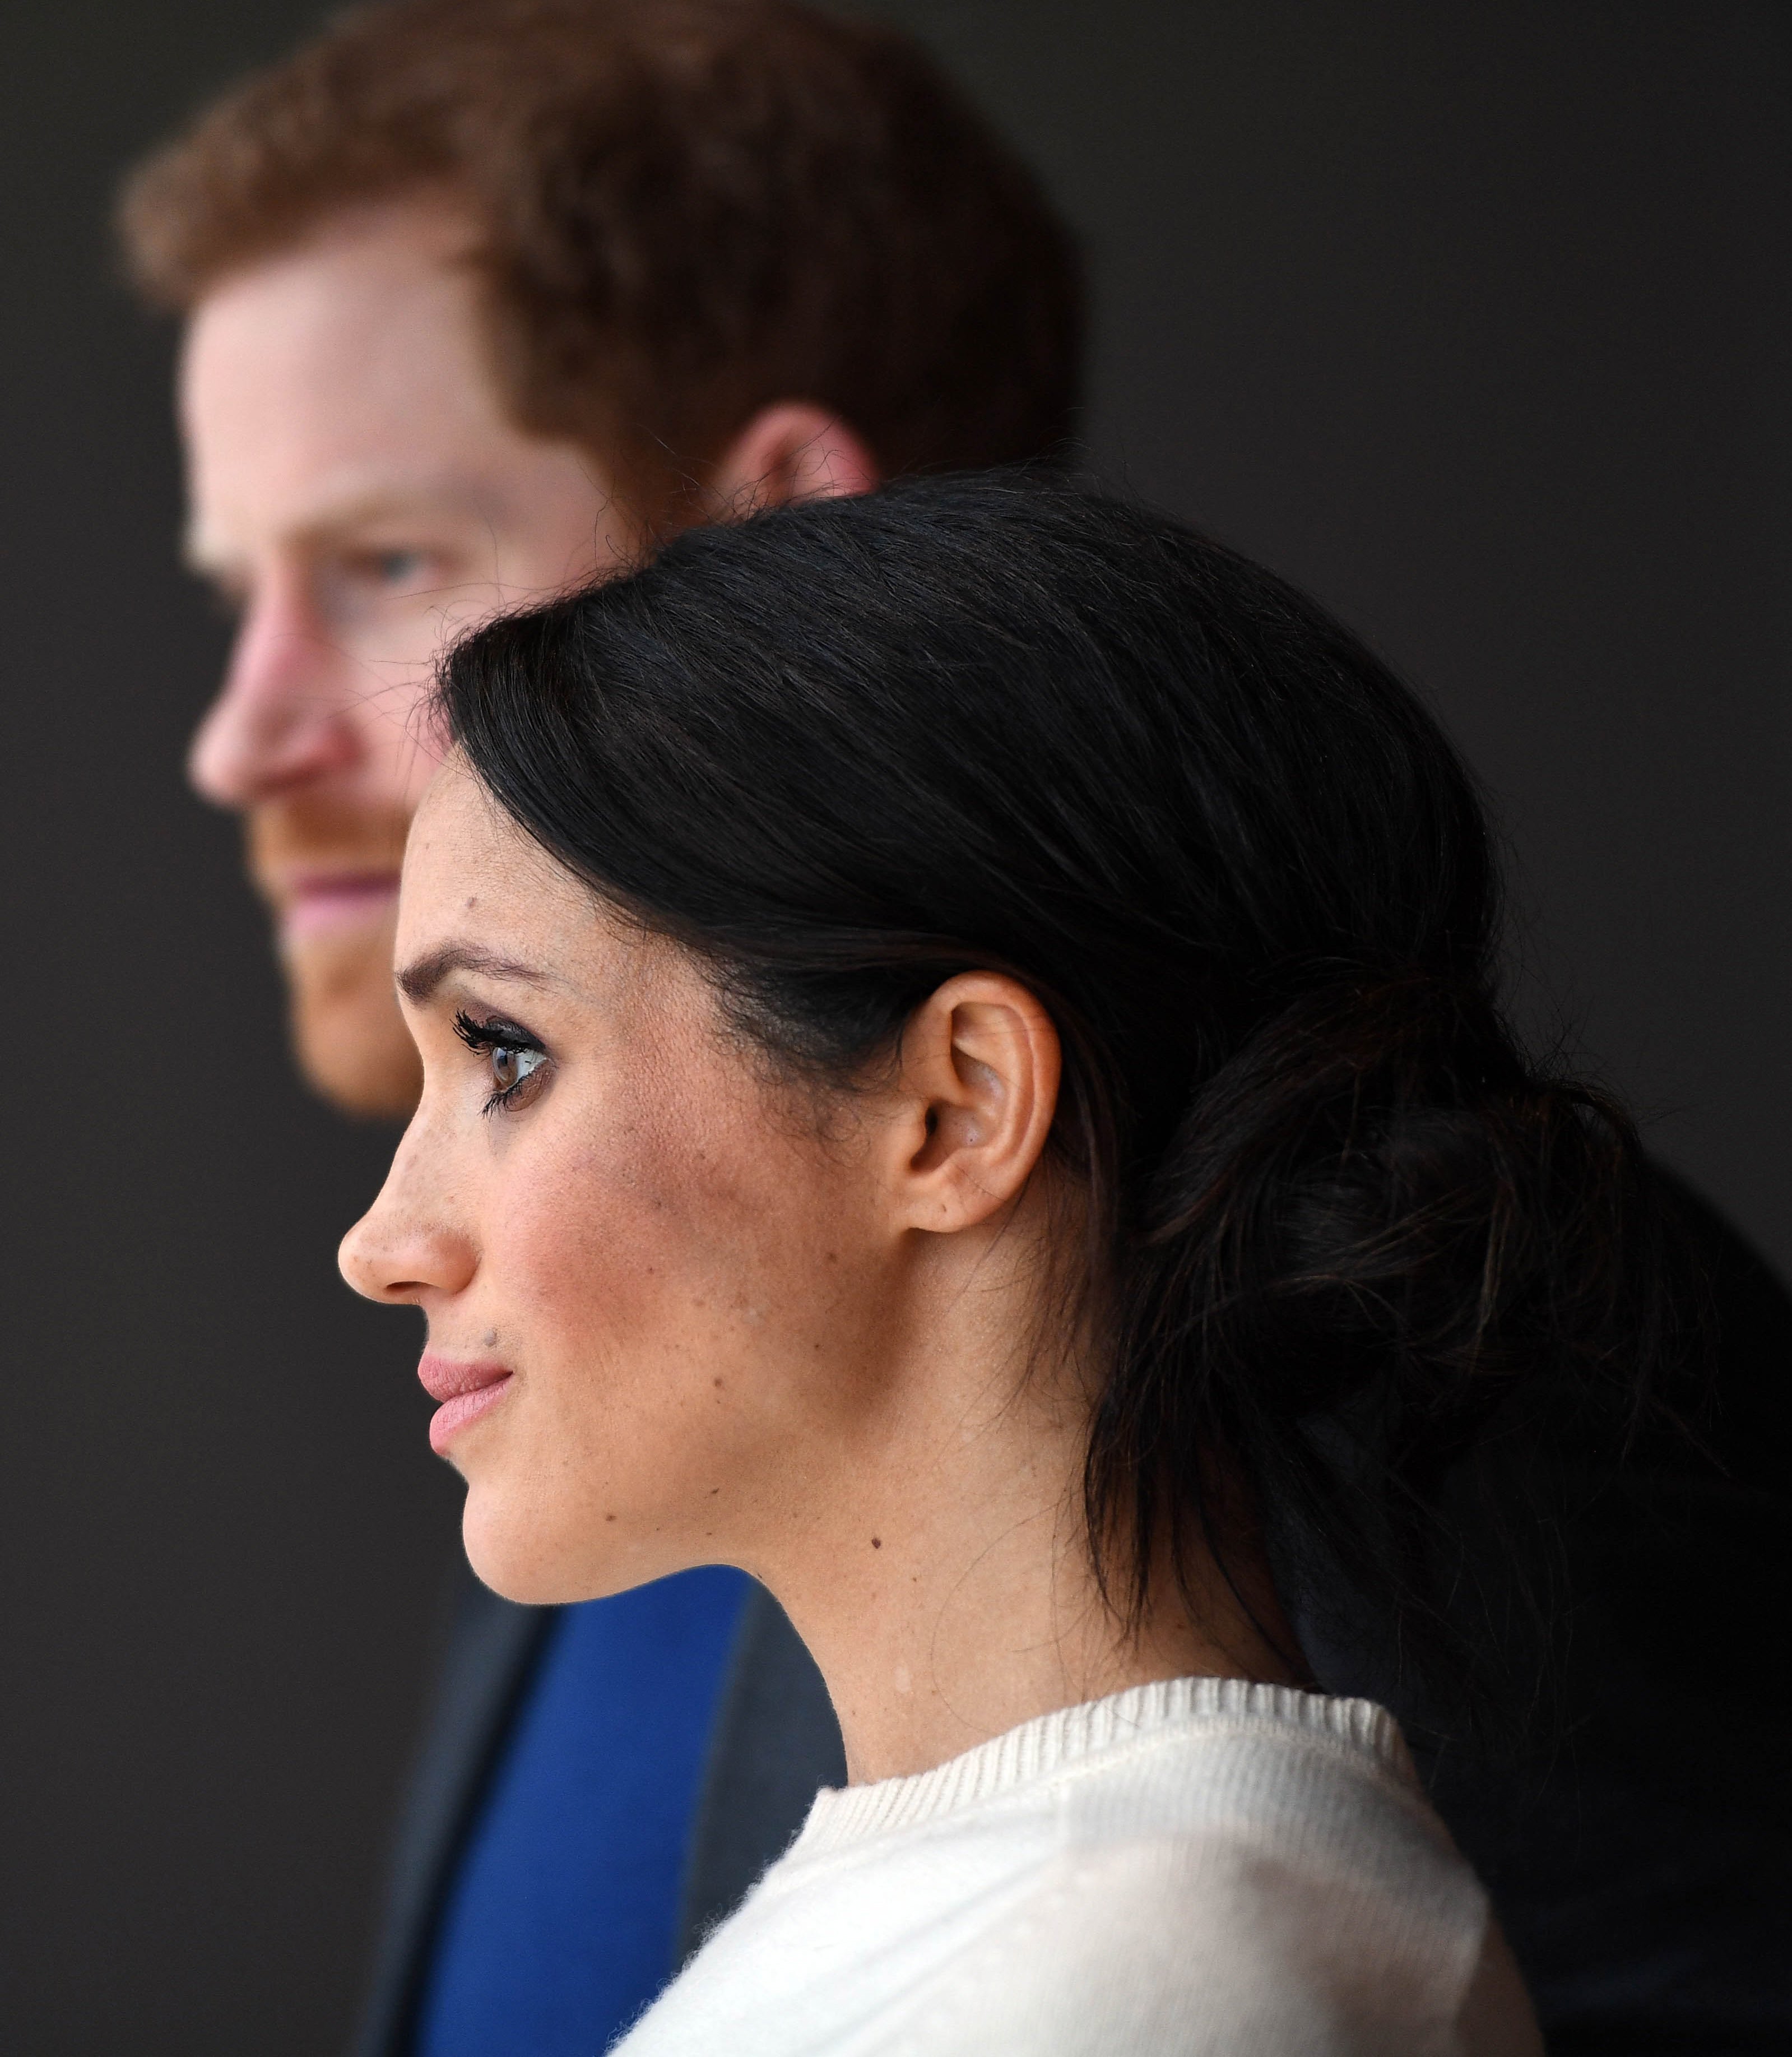 Prince Harry and his wife Meghan Markle during a visit to Titanic Belfast maritime museum on March 23, 2018 in Belfast, Nothern Ireland. / Source: Getty Images